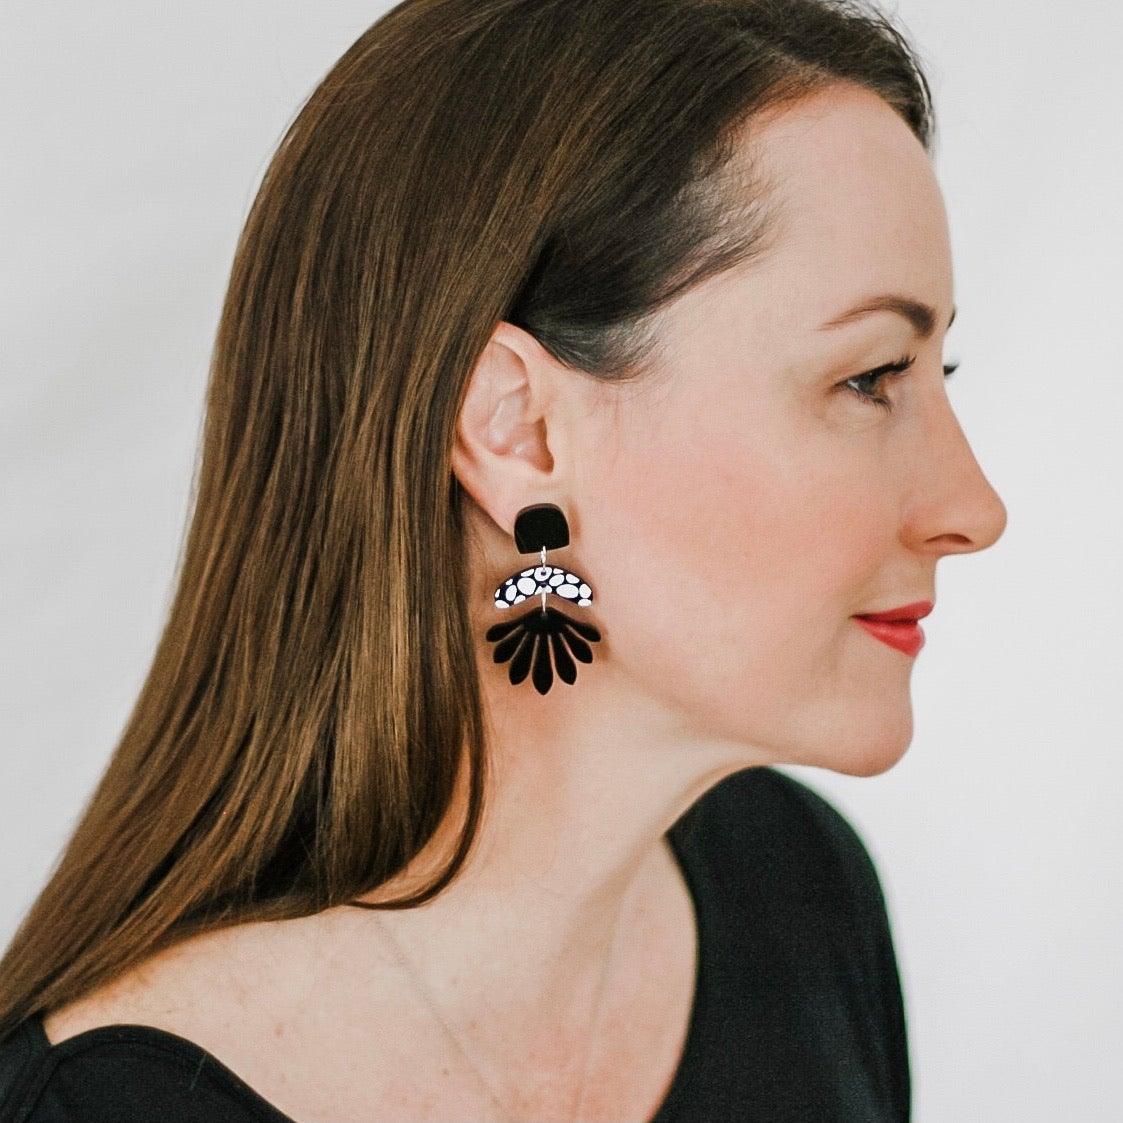 Black Statement Dangle Acrylic Earrings - Lacey Lou Sparkles